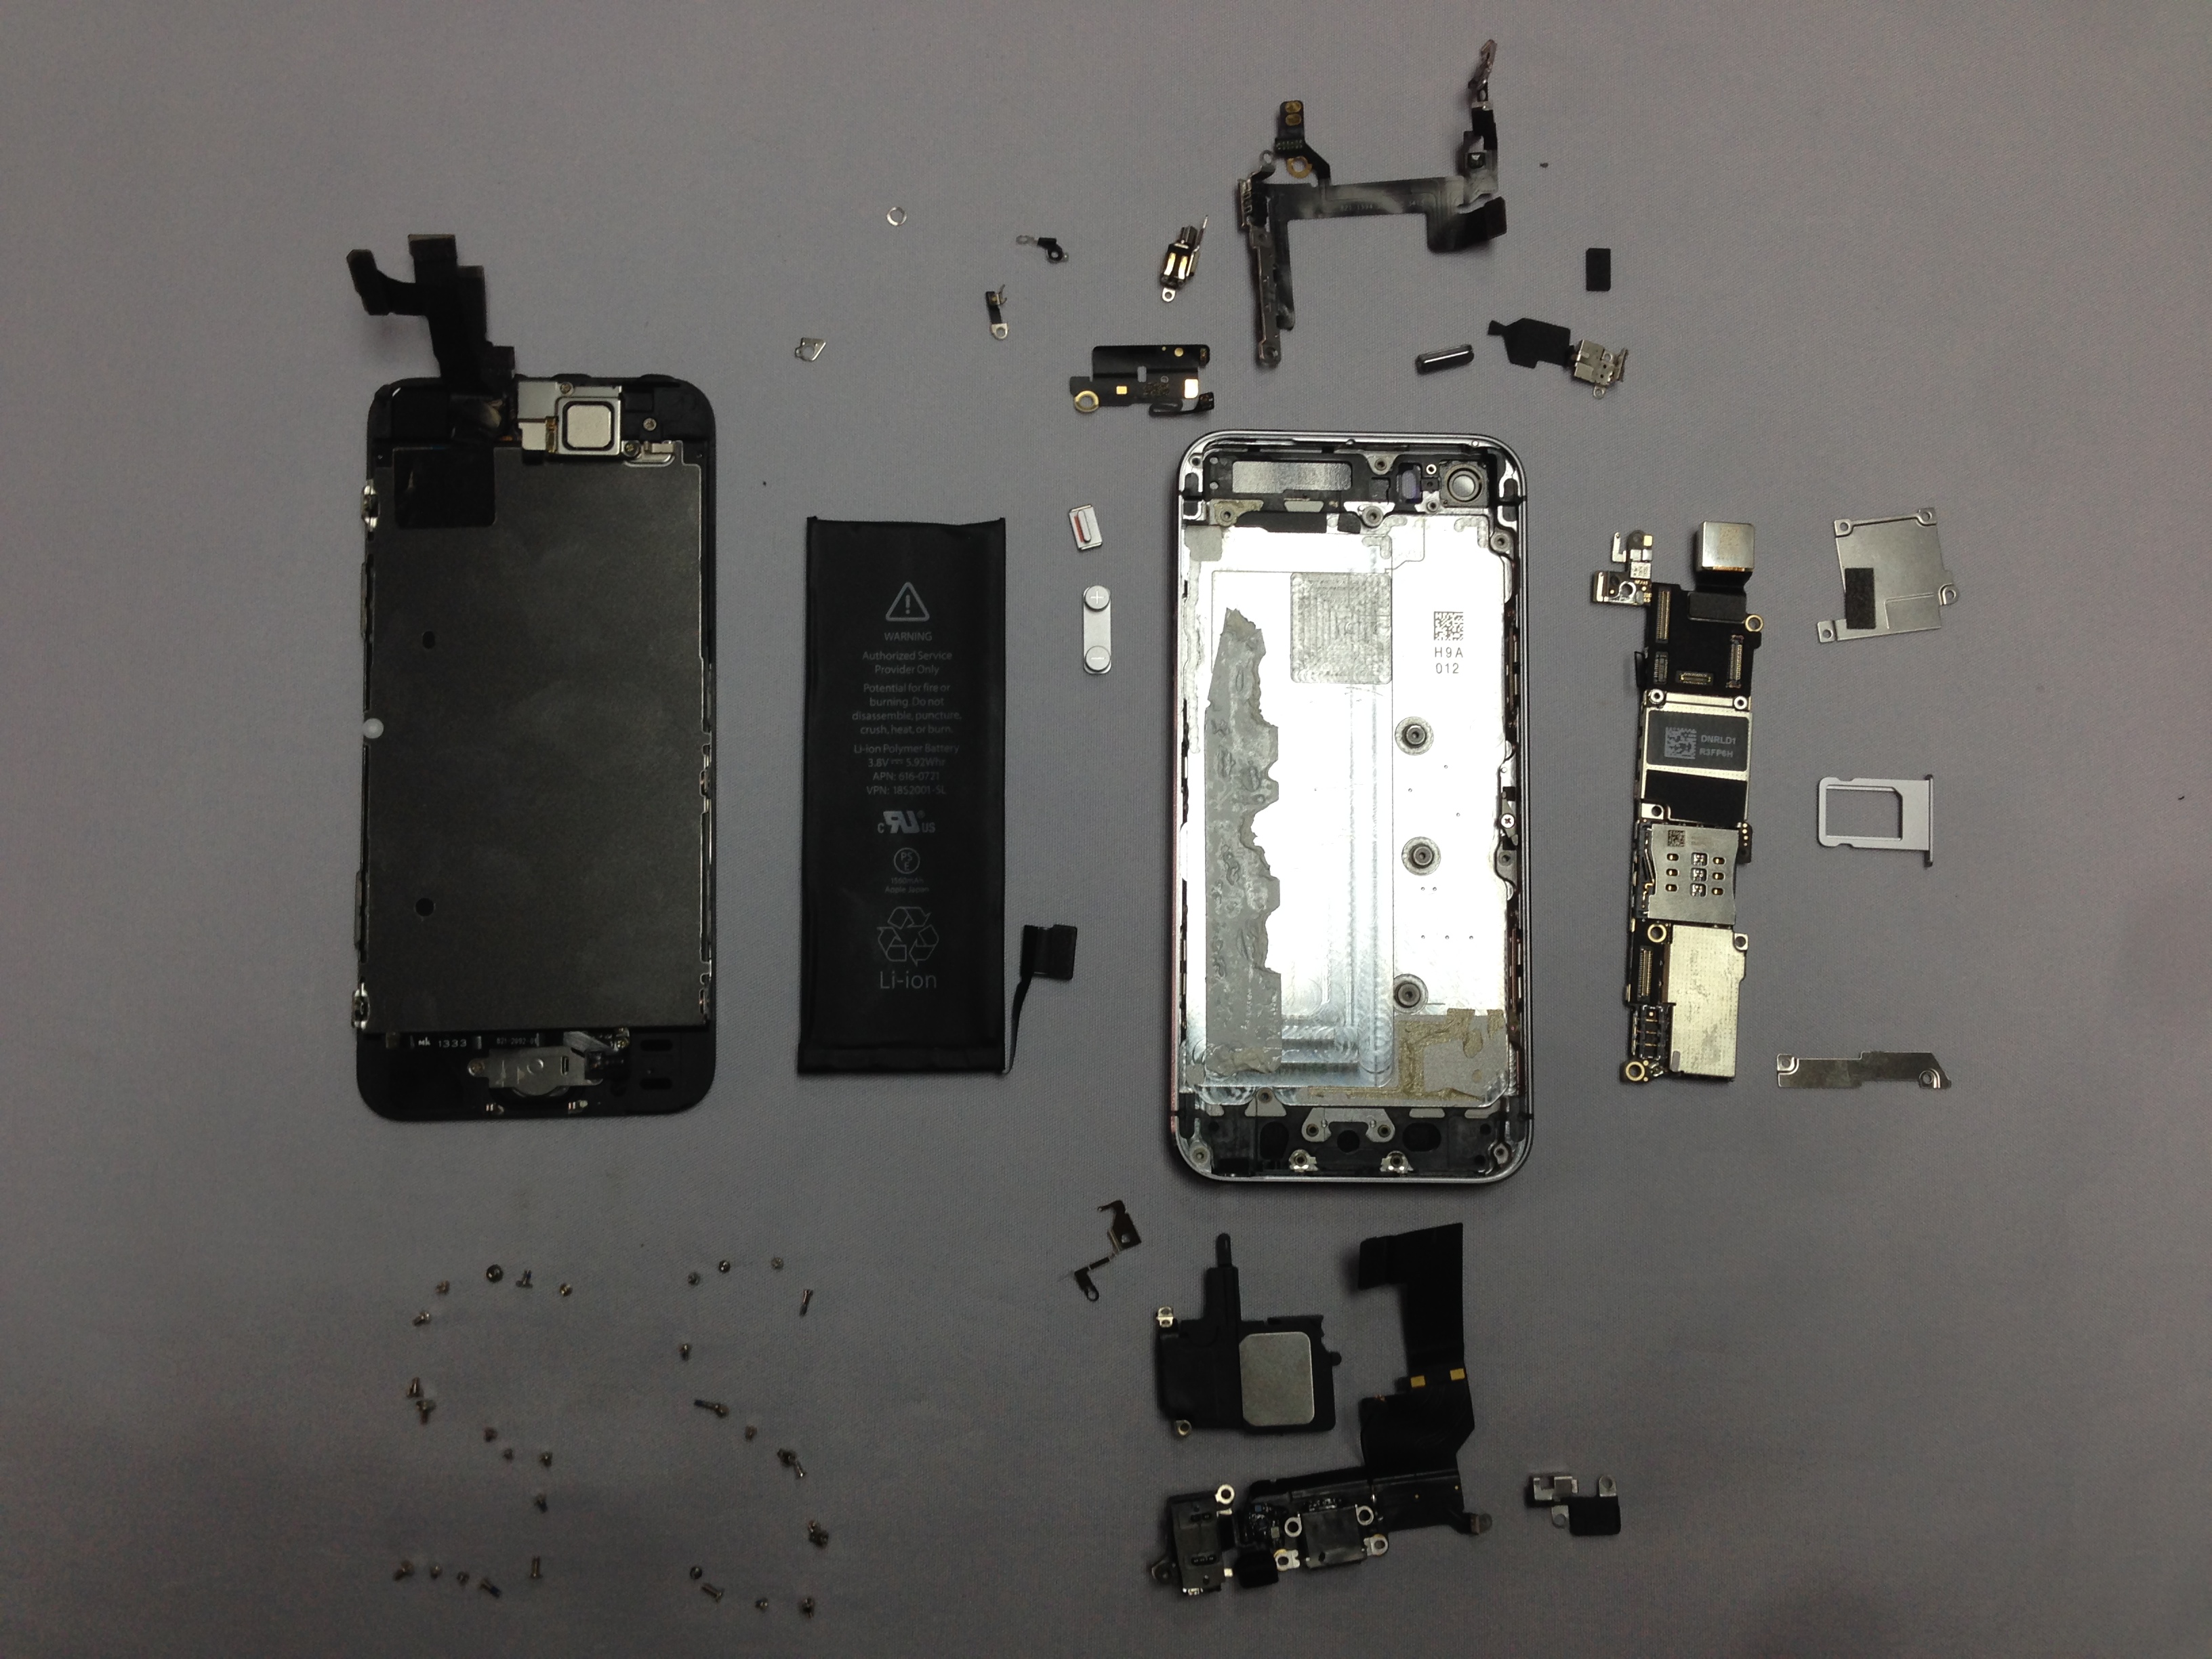 Replacement repair parts for iPhone 5s and iPhone 5c | www ...